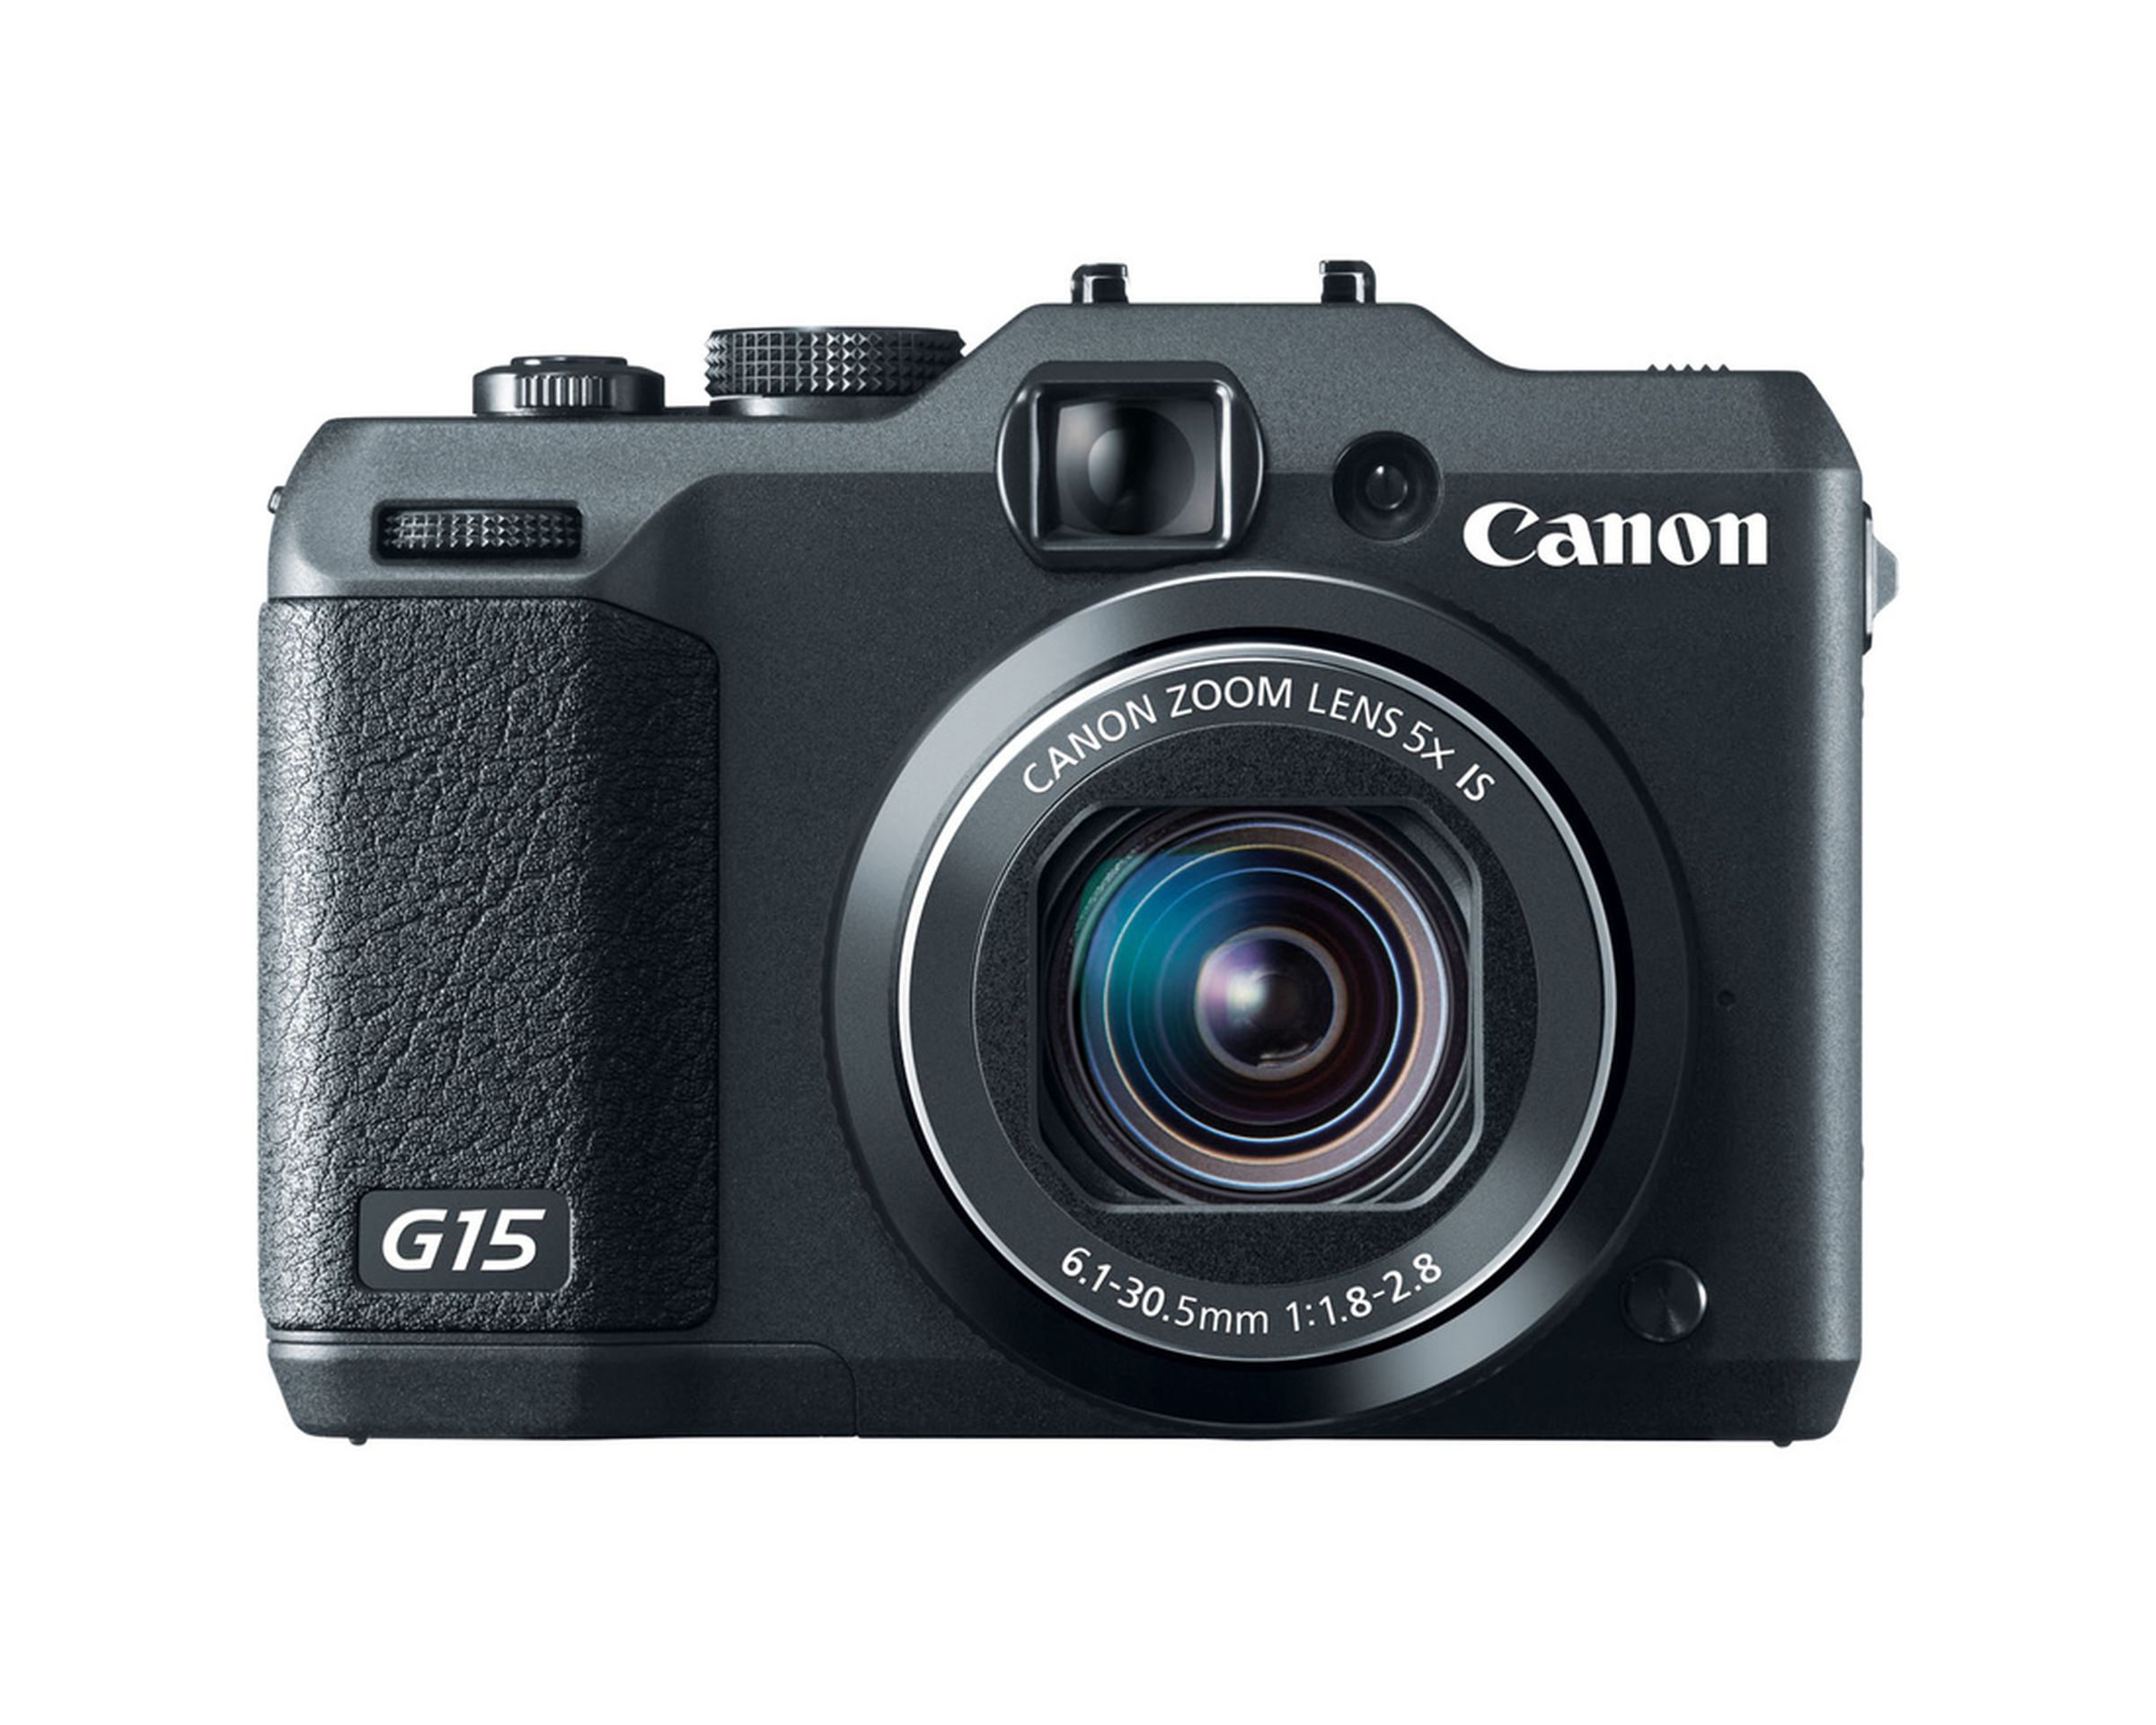 Canon PowerShot G15, S110, and SX50 HS pictures